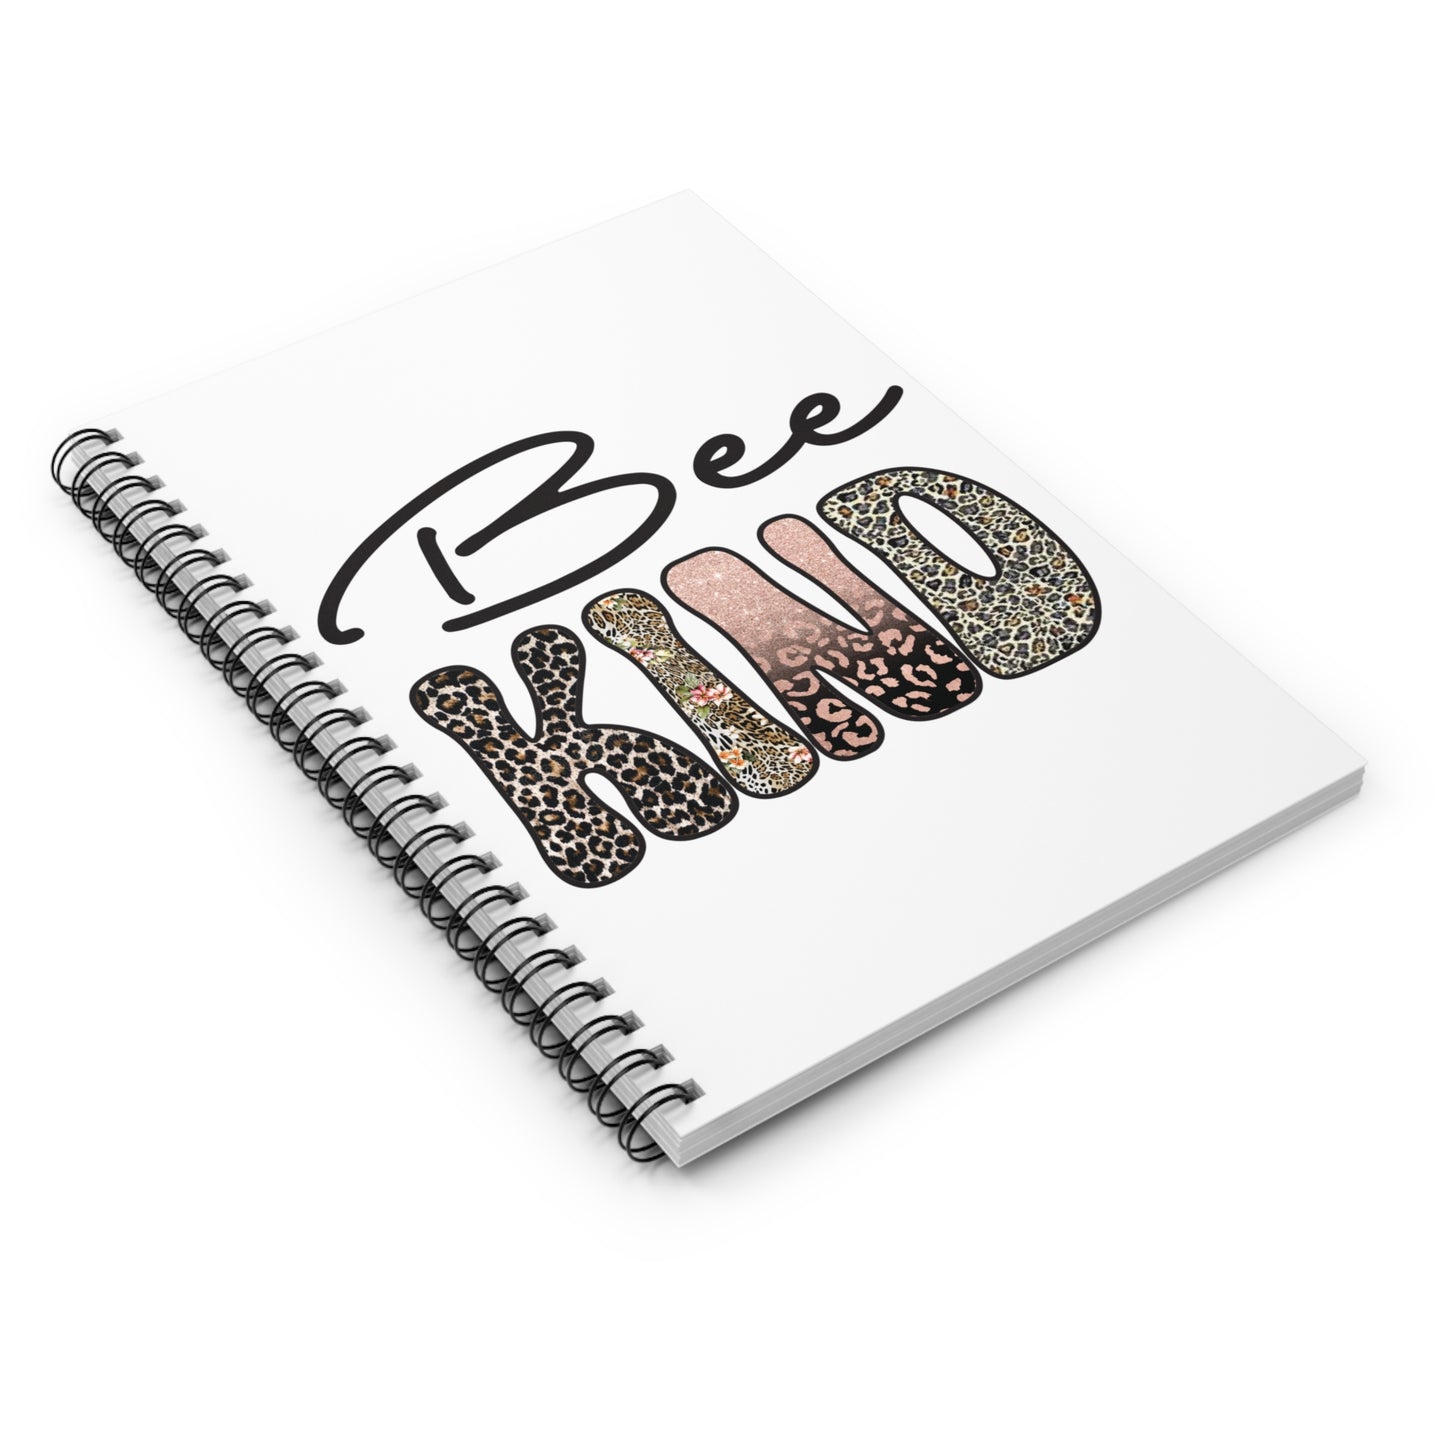 Bee Kind: Spiral Notebook - Log Books - Journals - Diaries - and More Custom Printed by TheGlassyLass